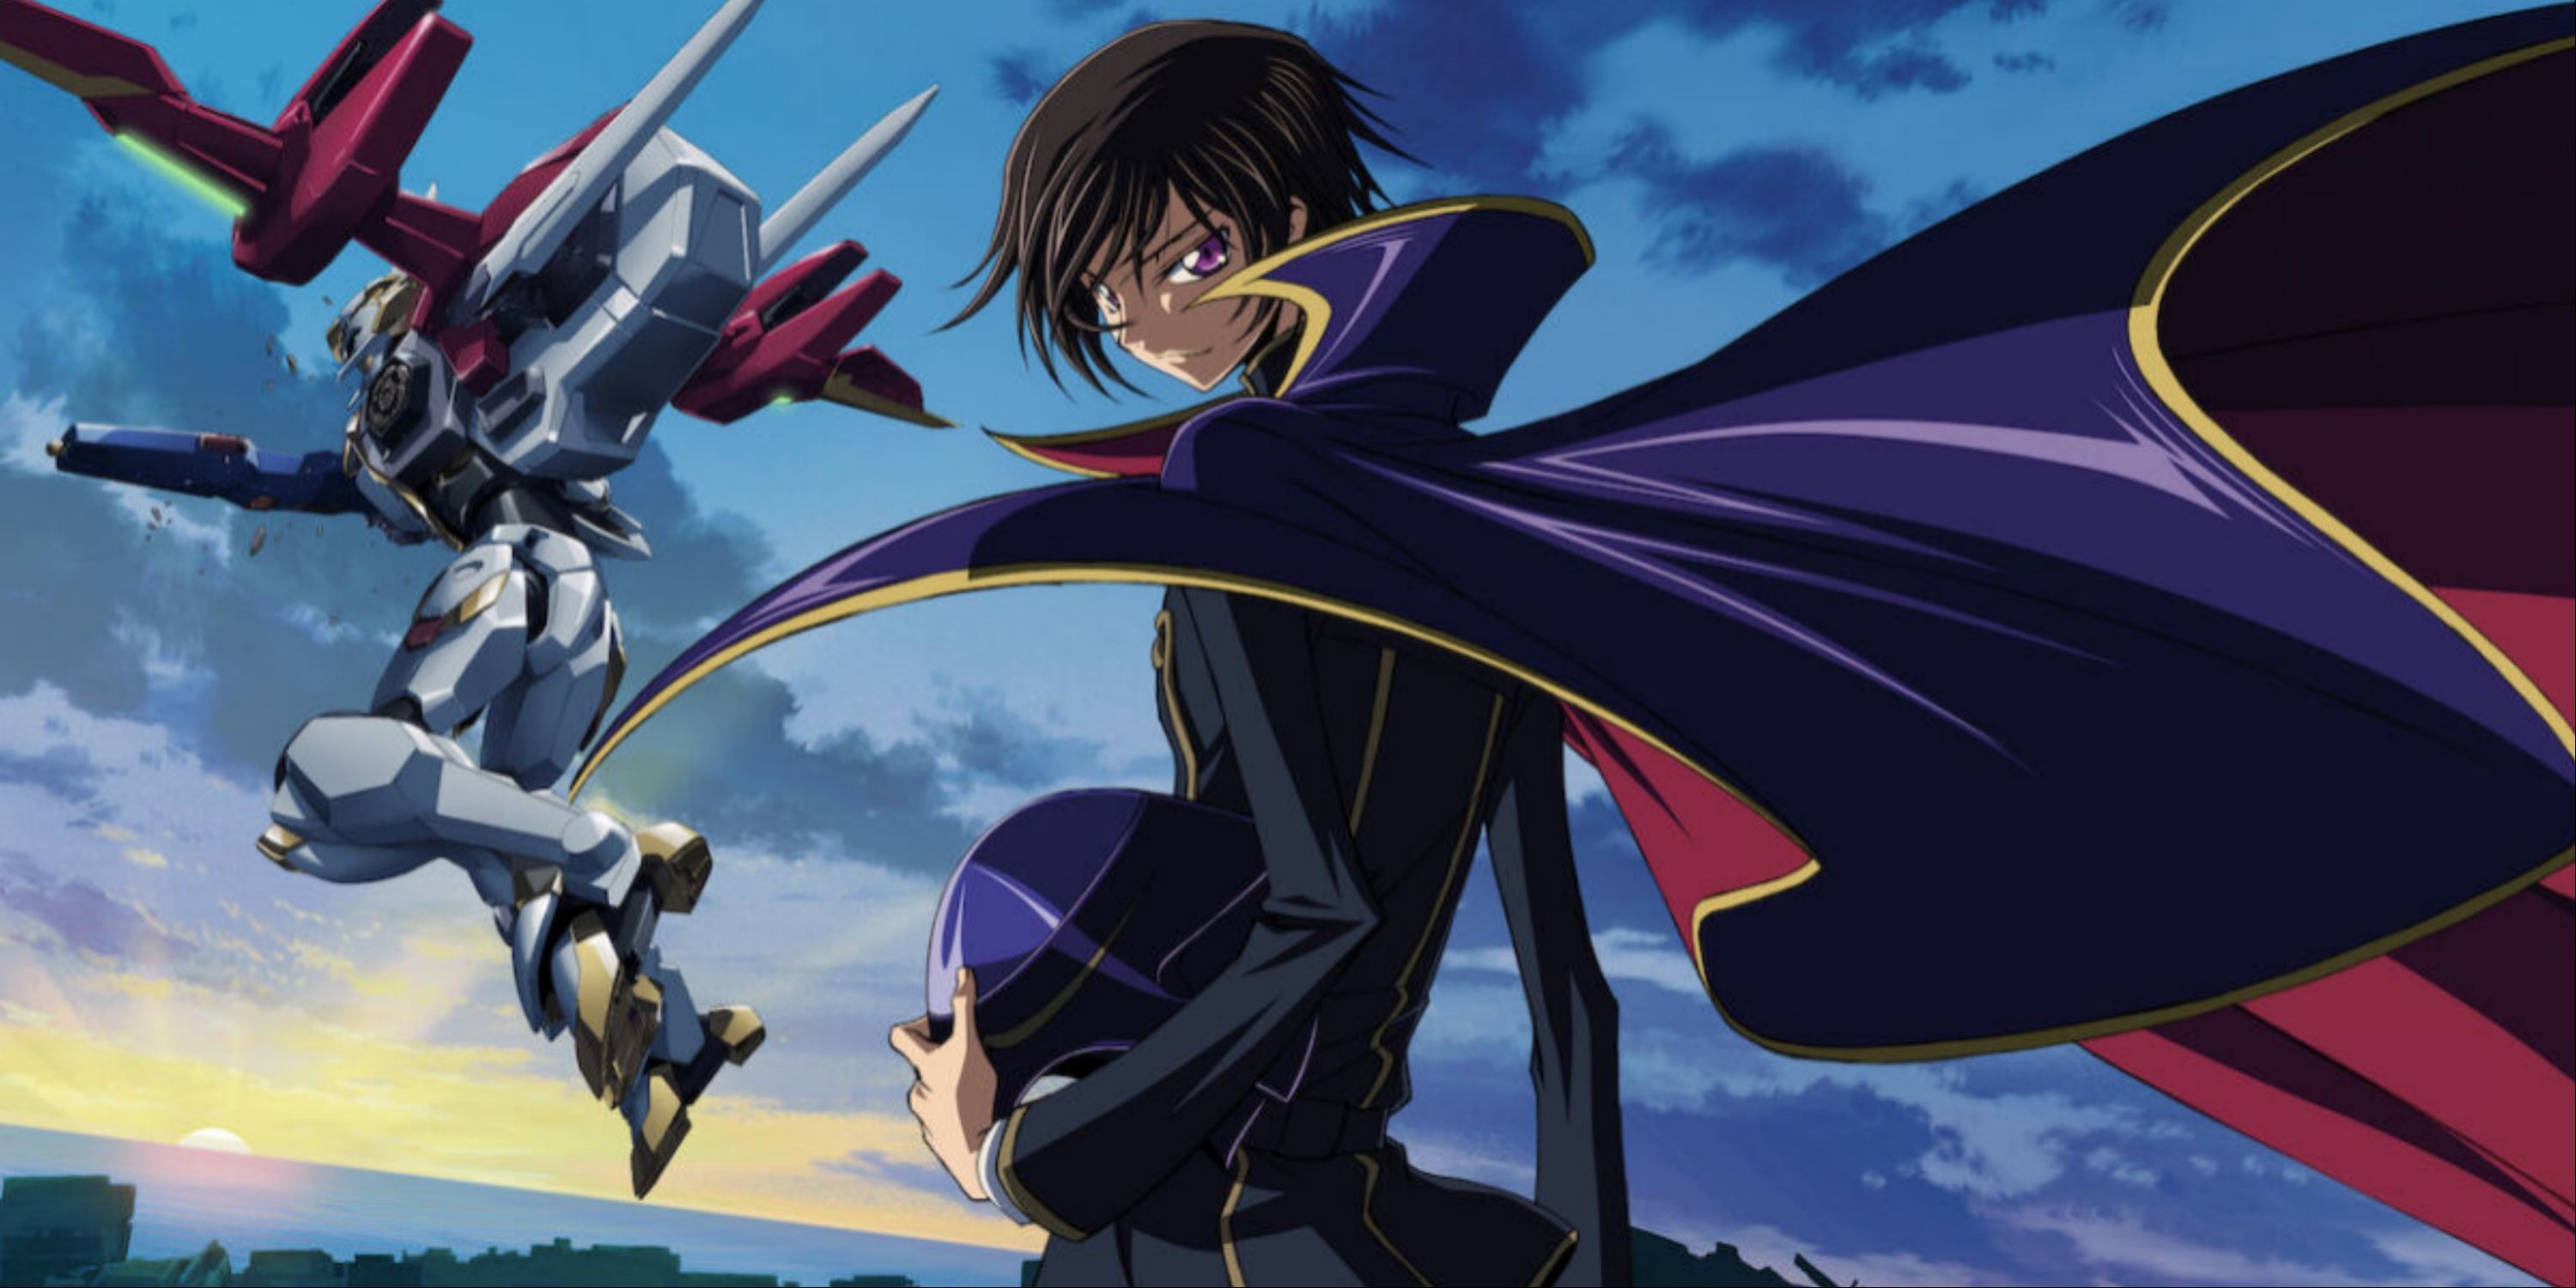 Lelouch holding his helmet with a mech in the background in Code Geass anime